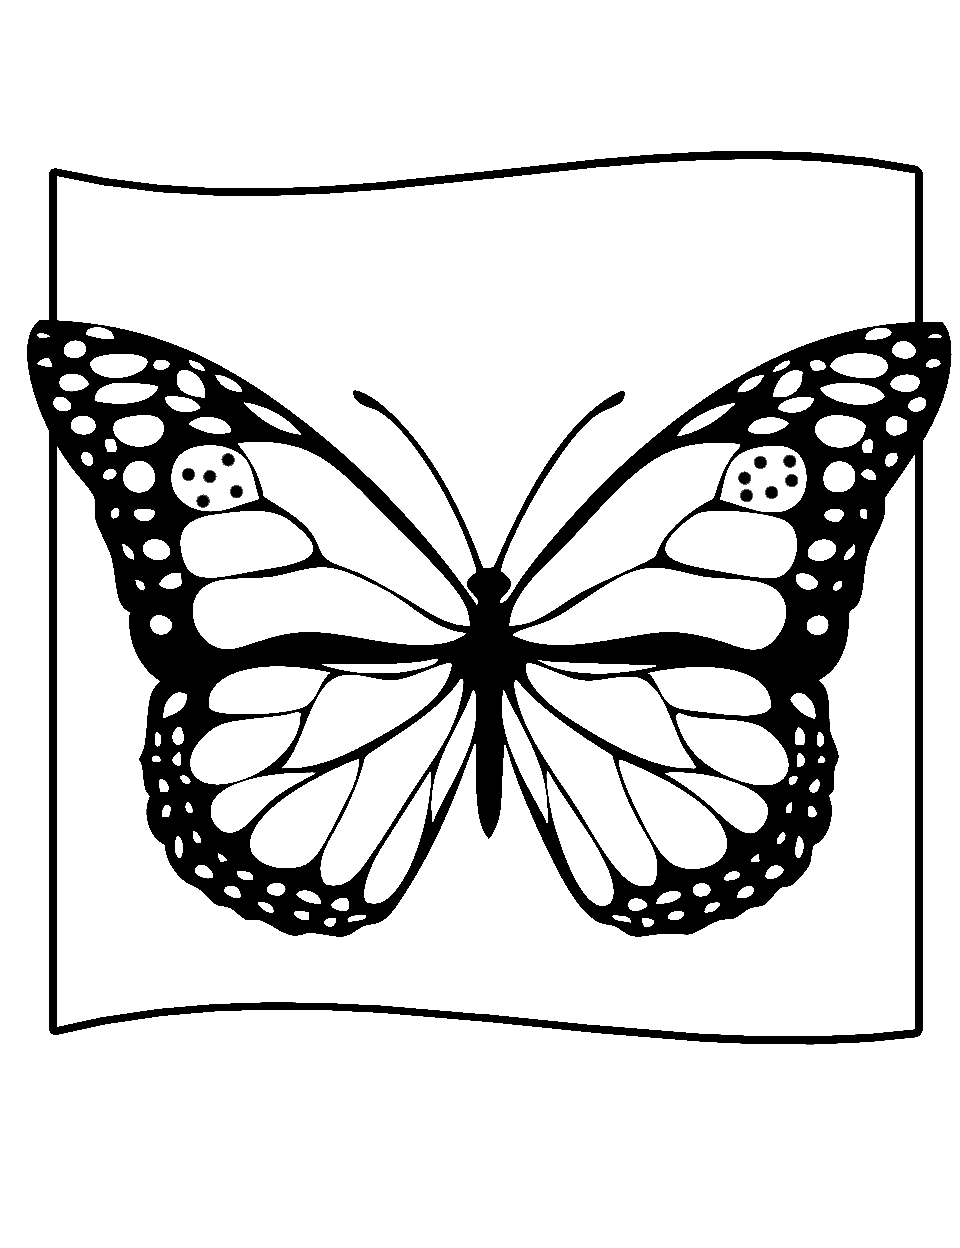 Insect Exploration Coloring Page - A detailed butterfly on a piece of paper for close inspection.